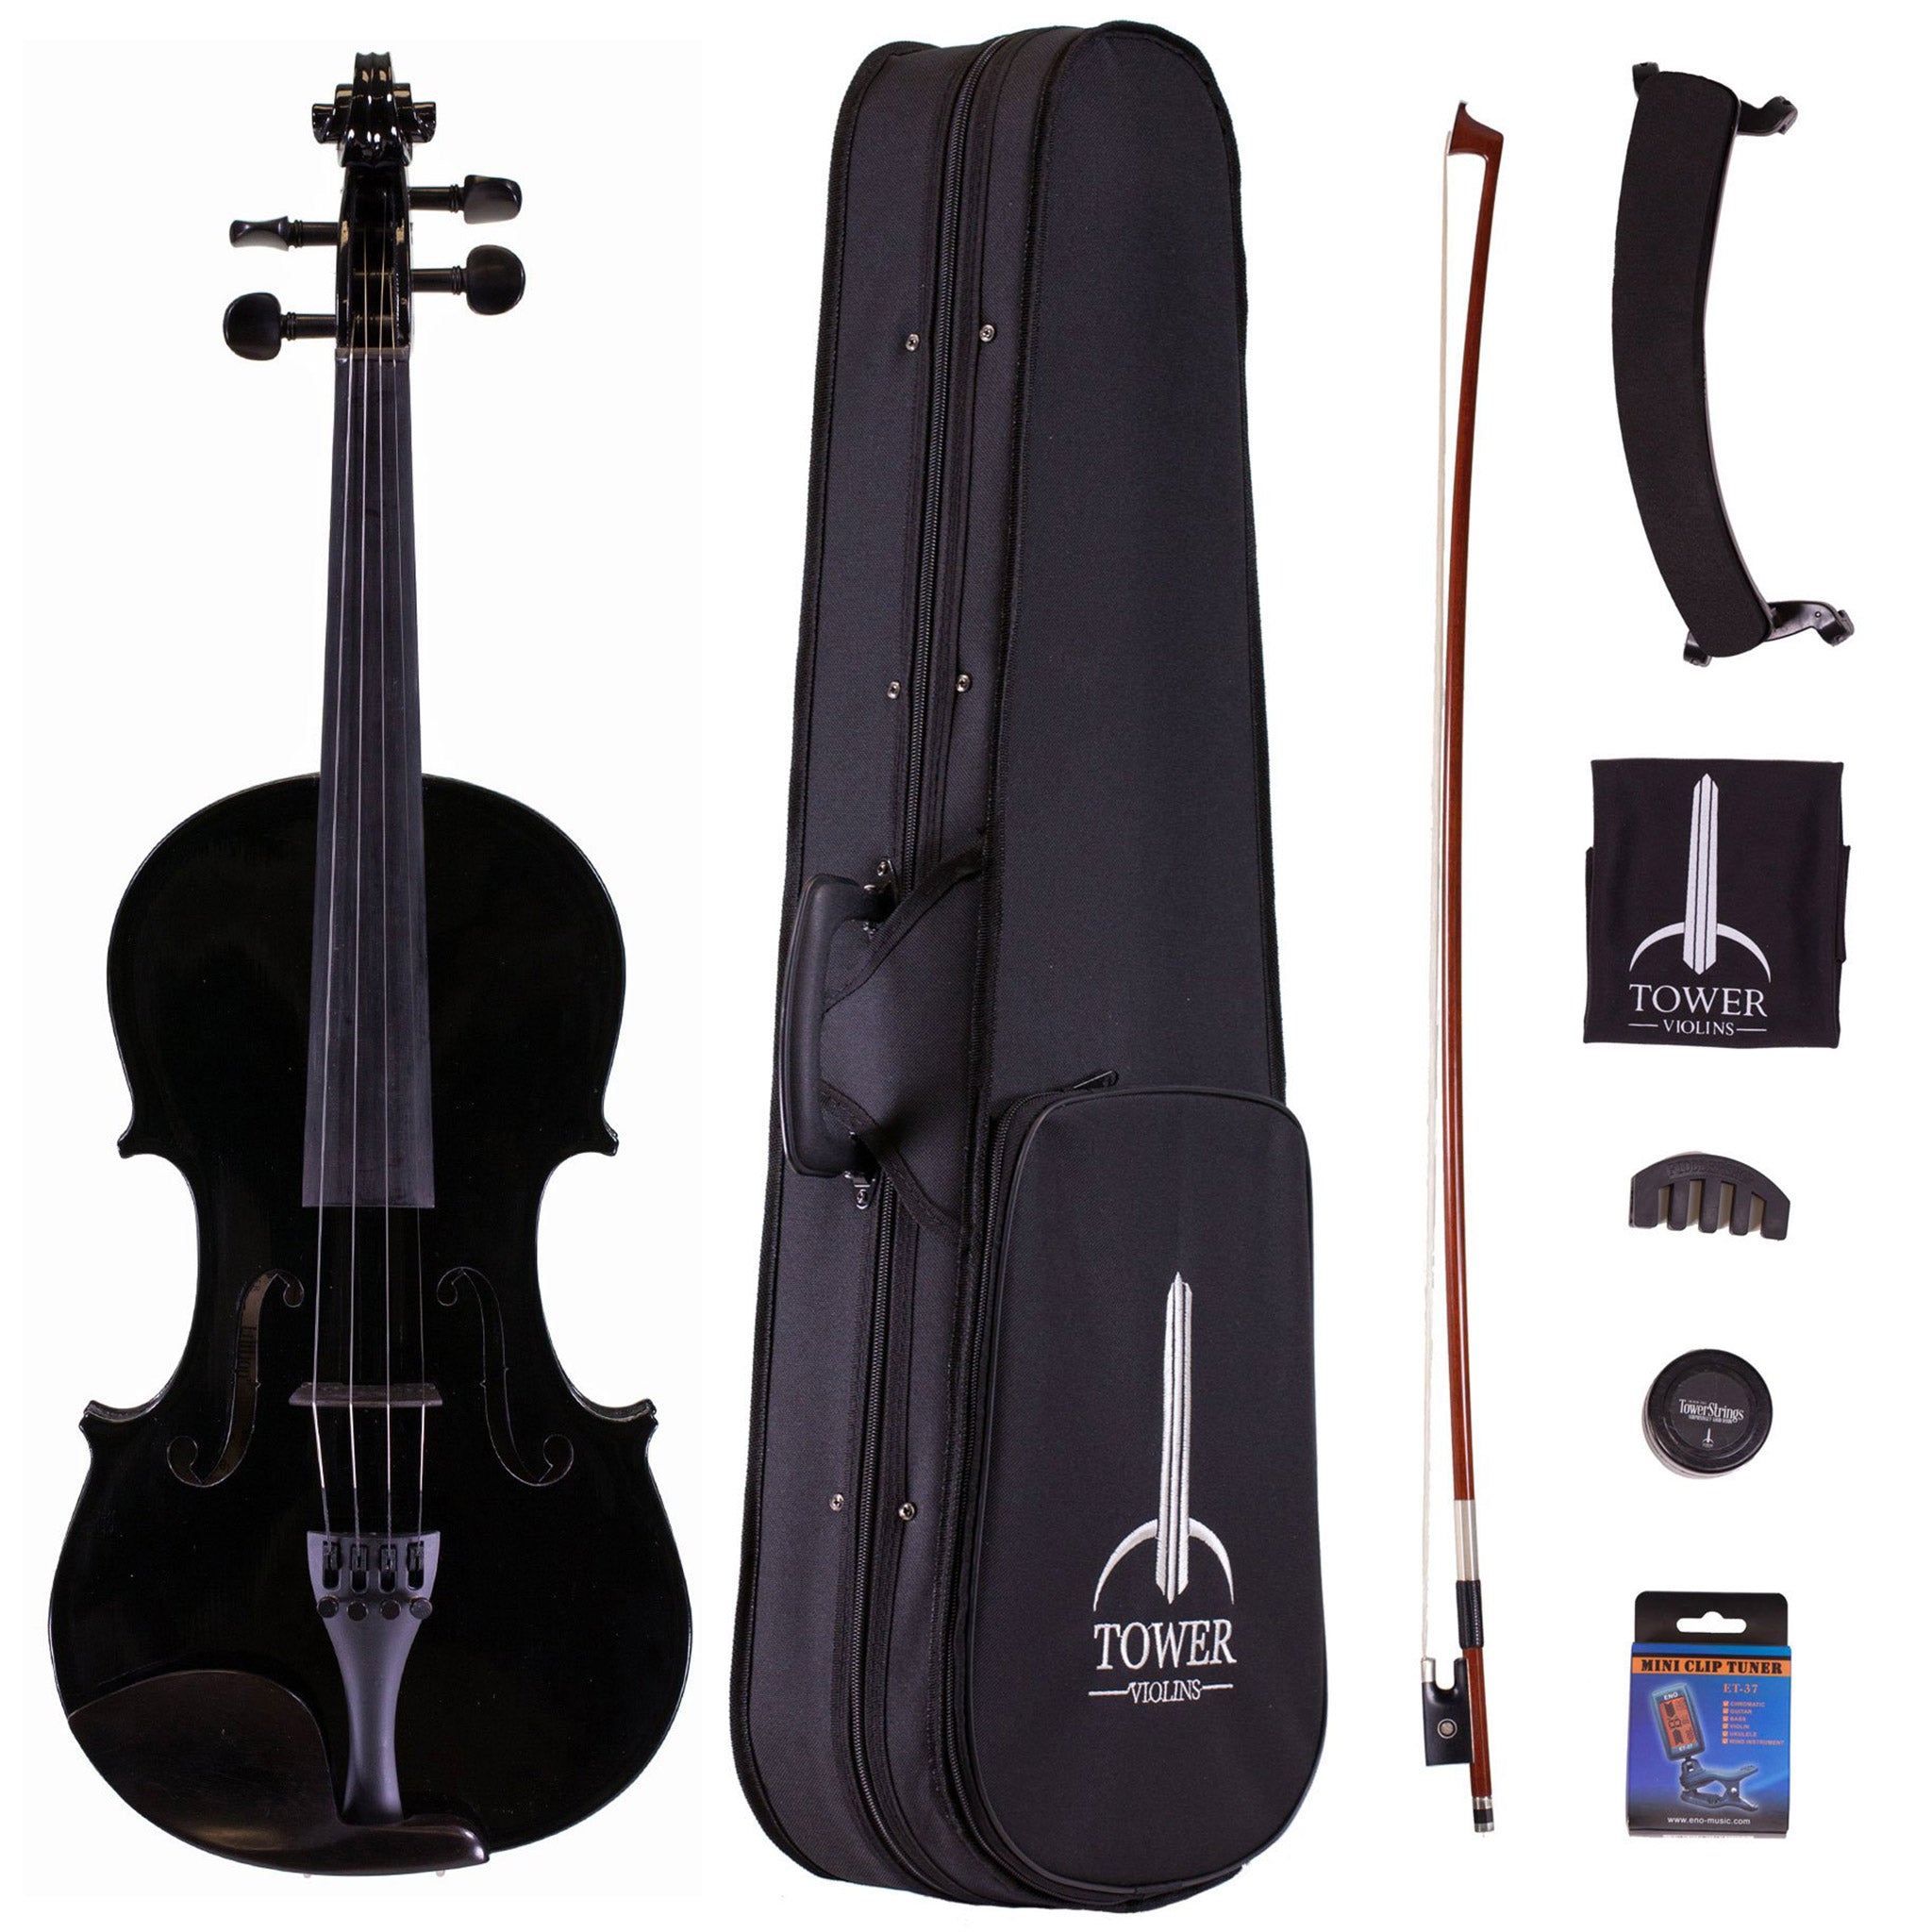 B-Stock Tower Strings Midnight Violin Outfit